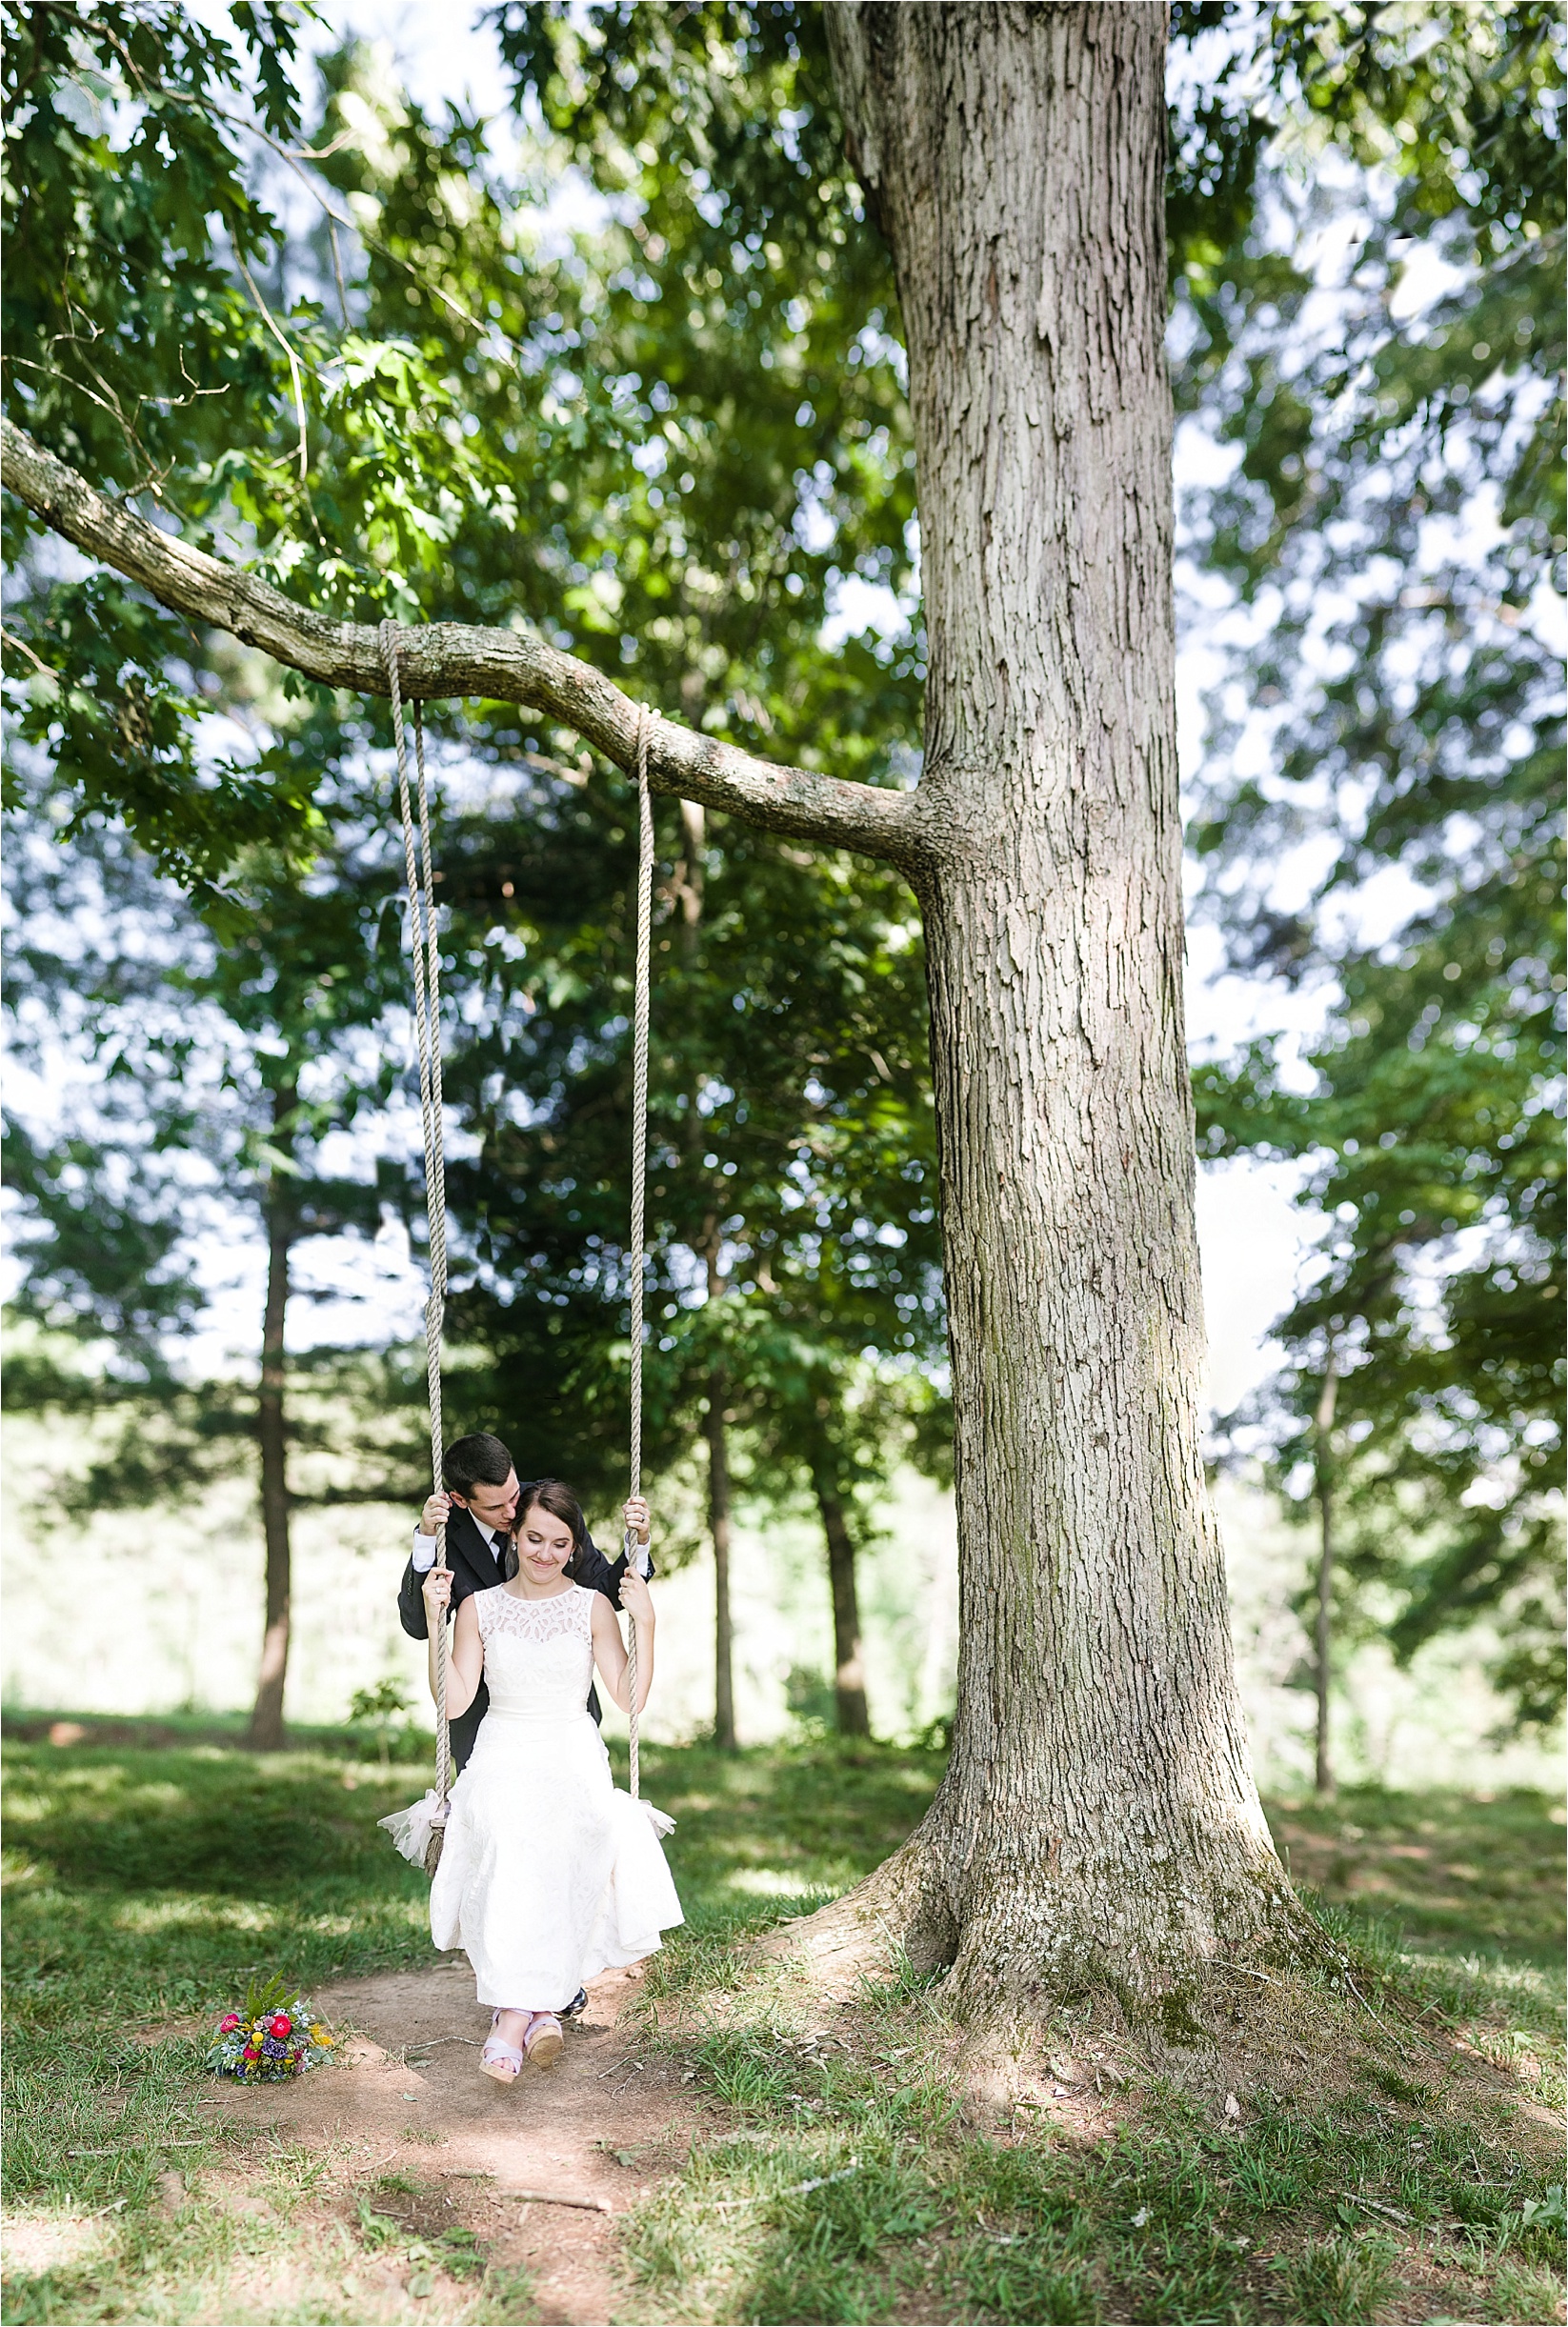 brenizer method on the swing at Caroline and Evans mountain wedding at yesterday spaces in asheville leicester north carolina